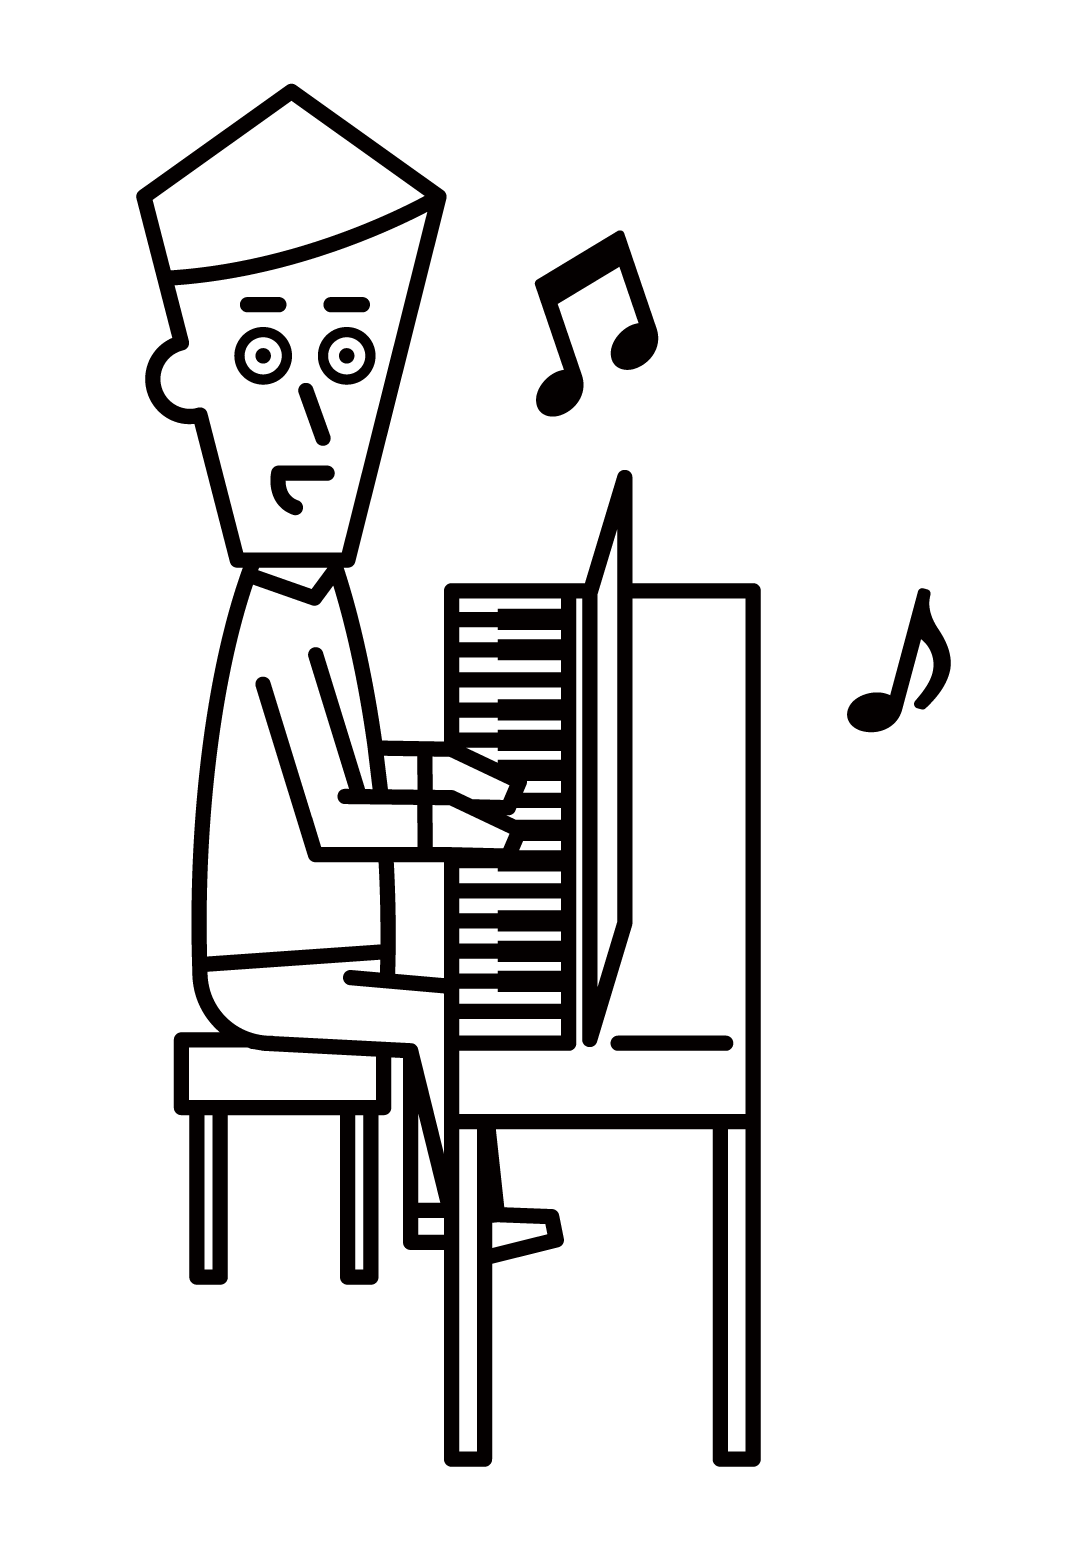 Illustration of a man playing an electronic piano